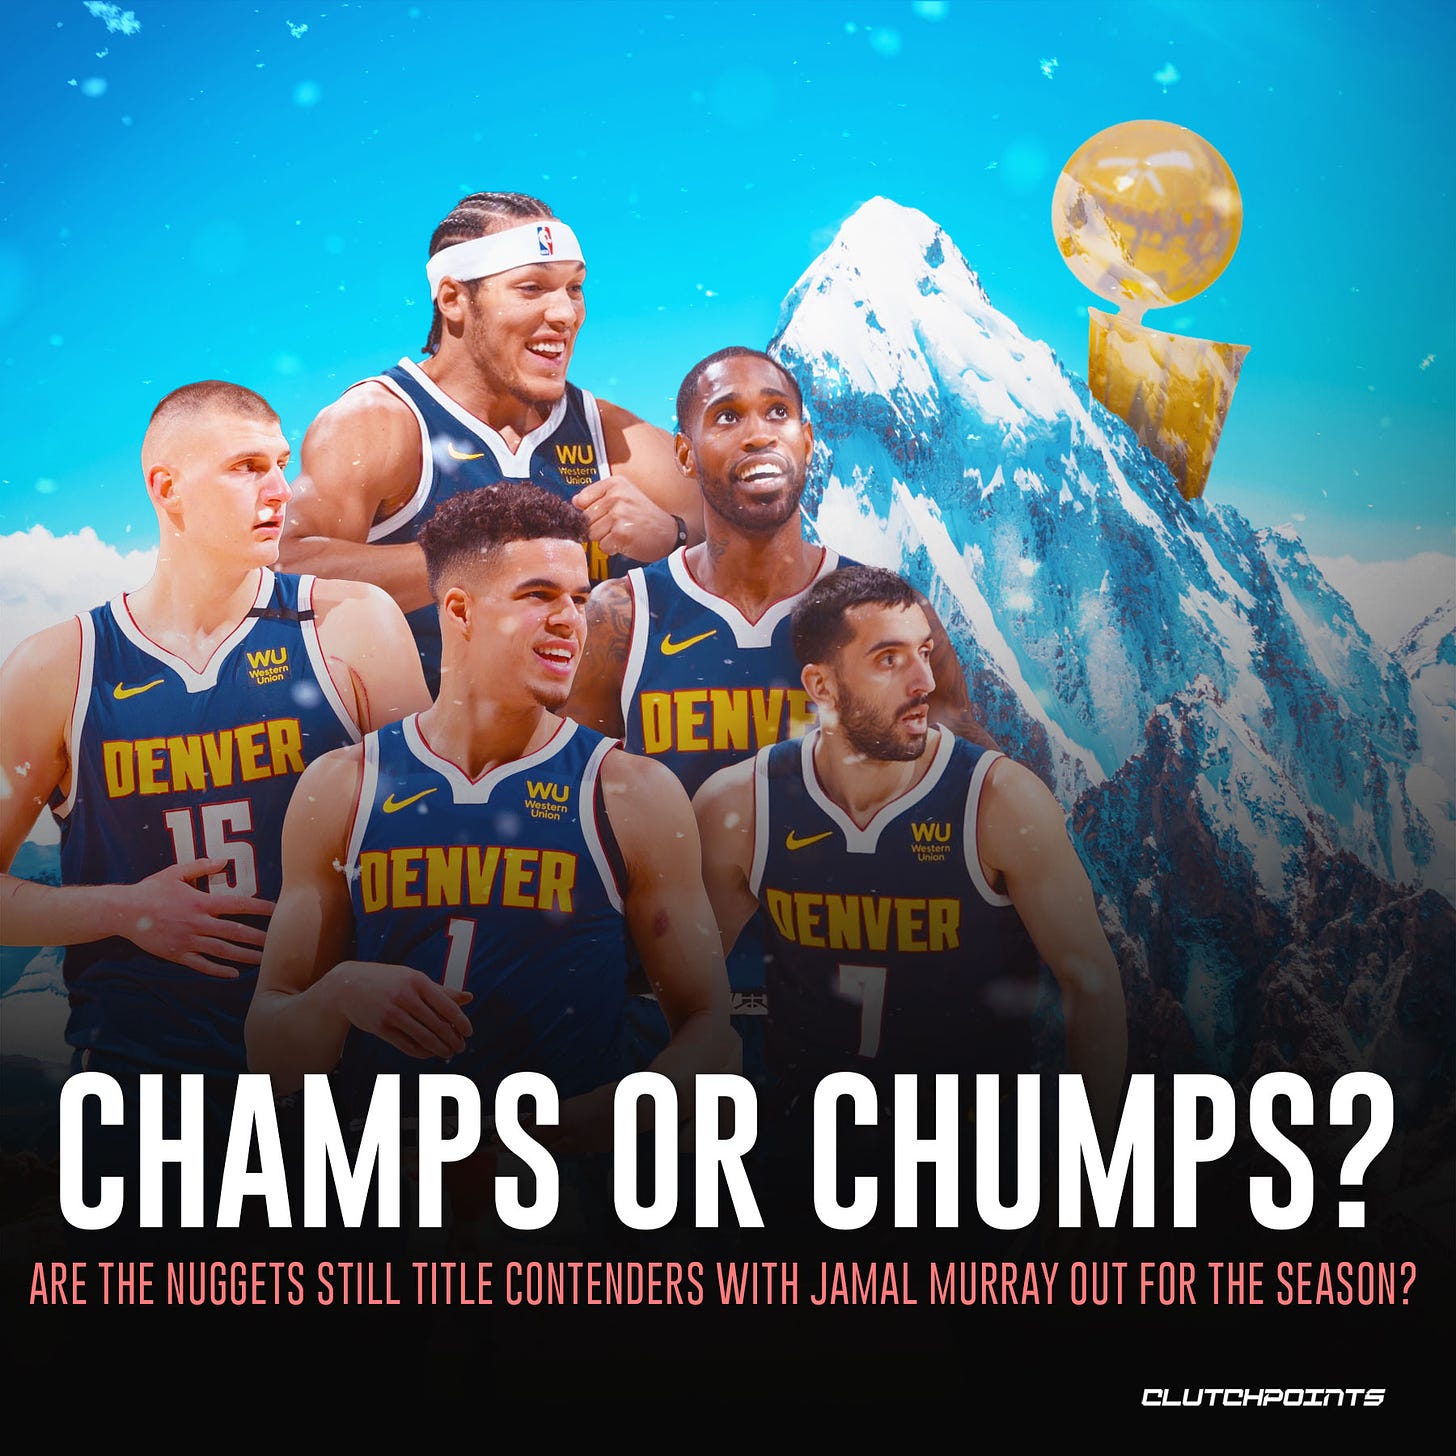 May be an image of 5 people and text that says 'Want wu DENVER 15 DENV OENVER CHAMPS OR CHUMPS? ARE THE NUGGETS STILL TITLE CONTENDERS WITH JAMAL MURRAY OUT FOR THE SEASON? CLUTCHPOINTS'